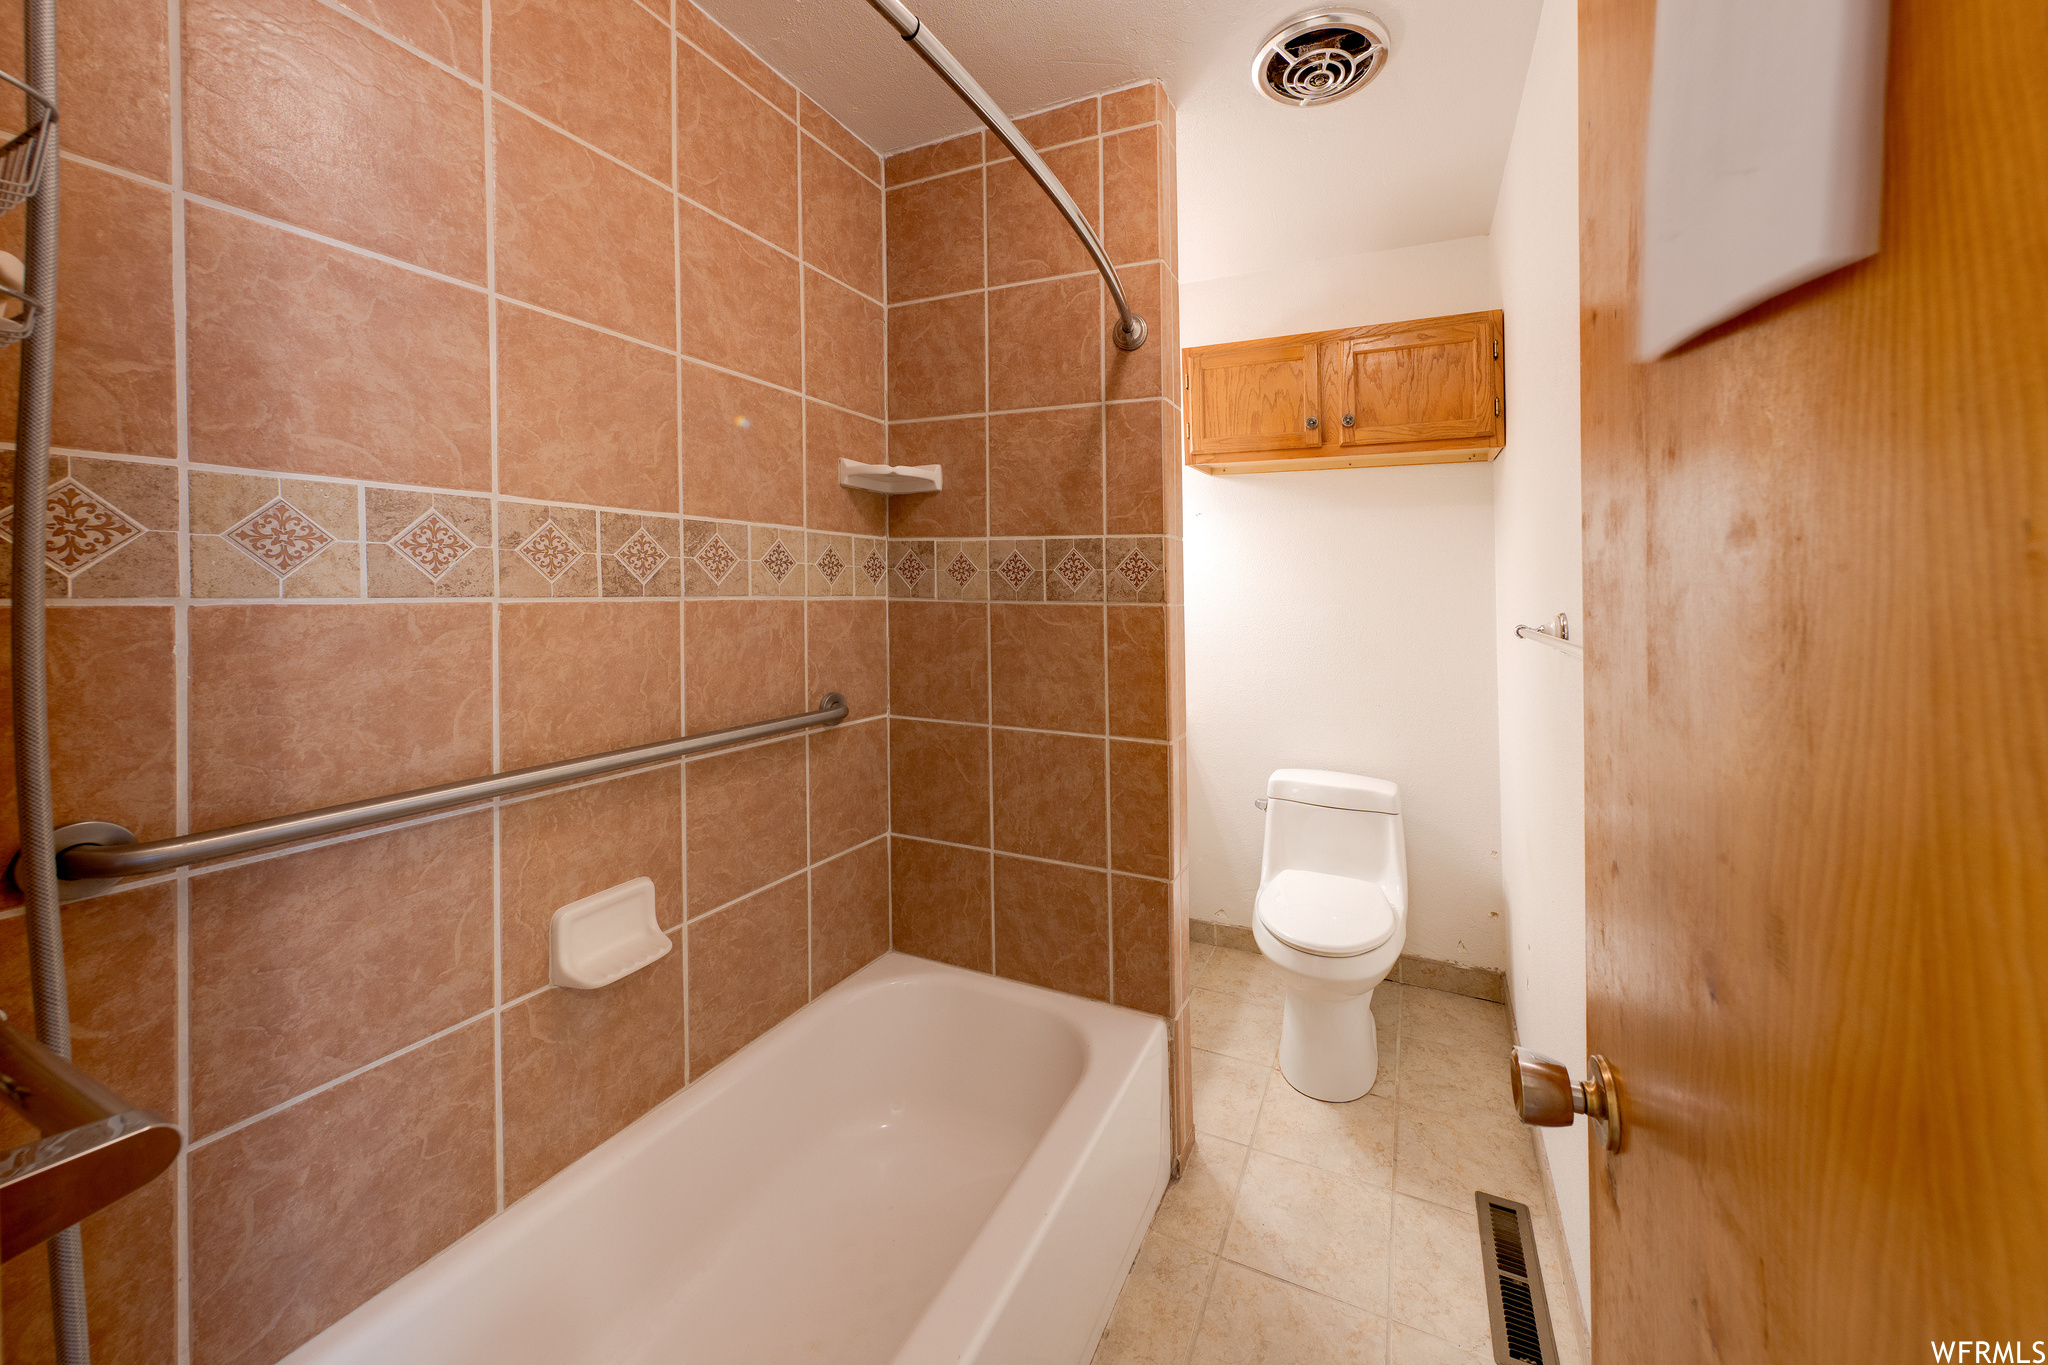 Bathroom with tile flooring, toilet, and shower / bathing tub combination